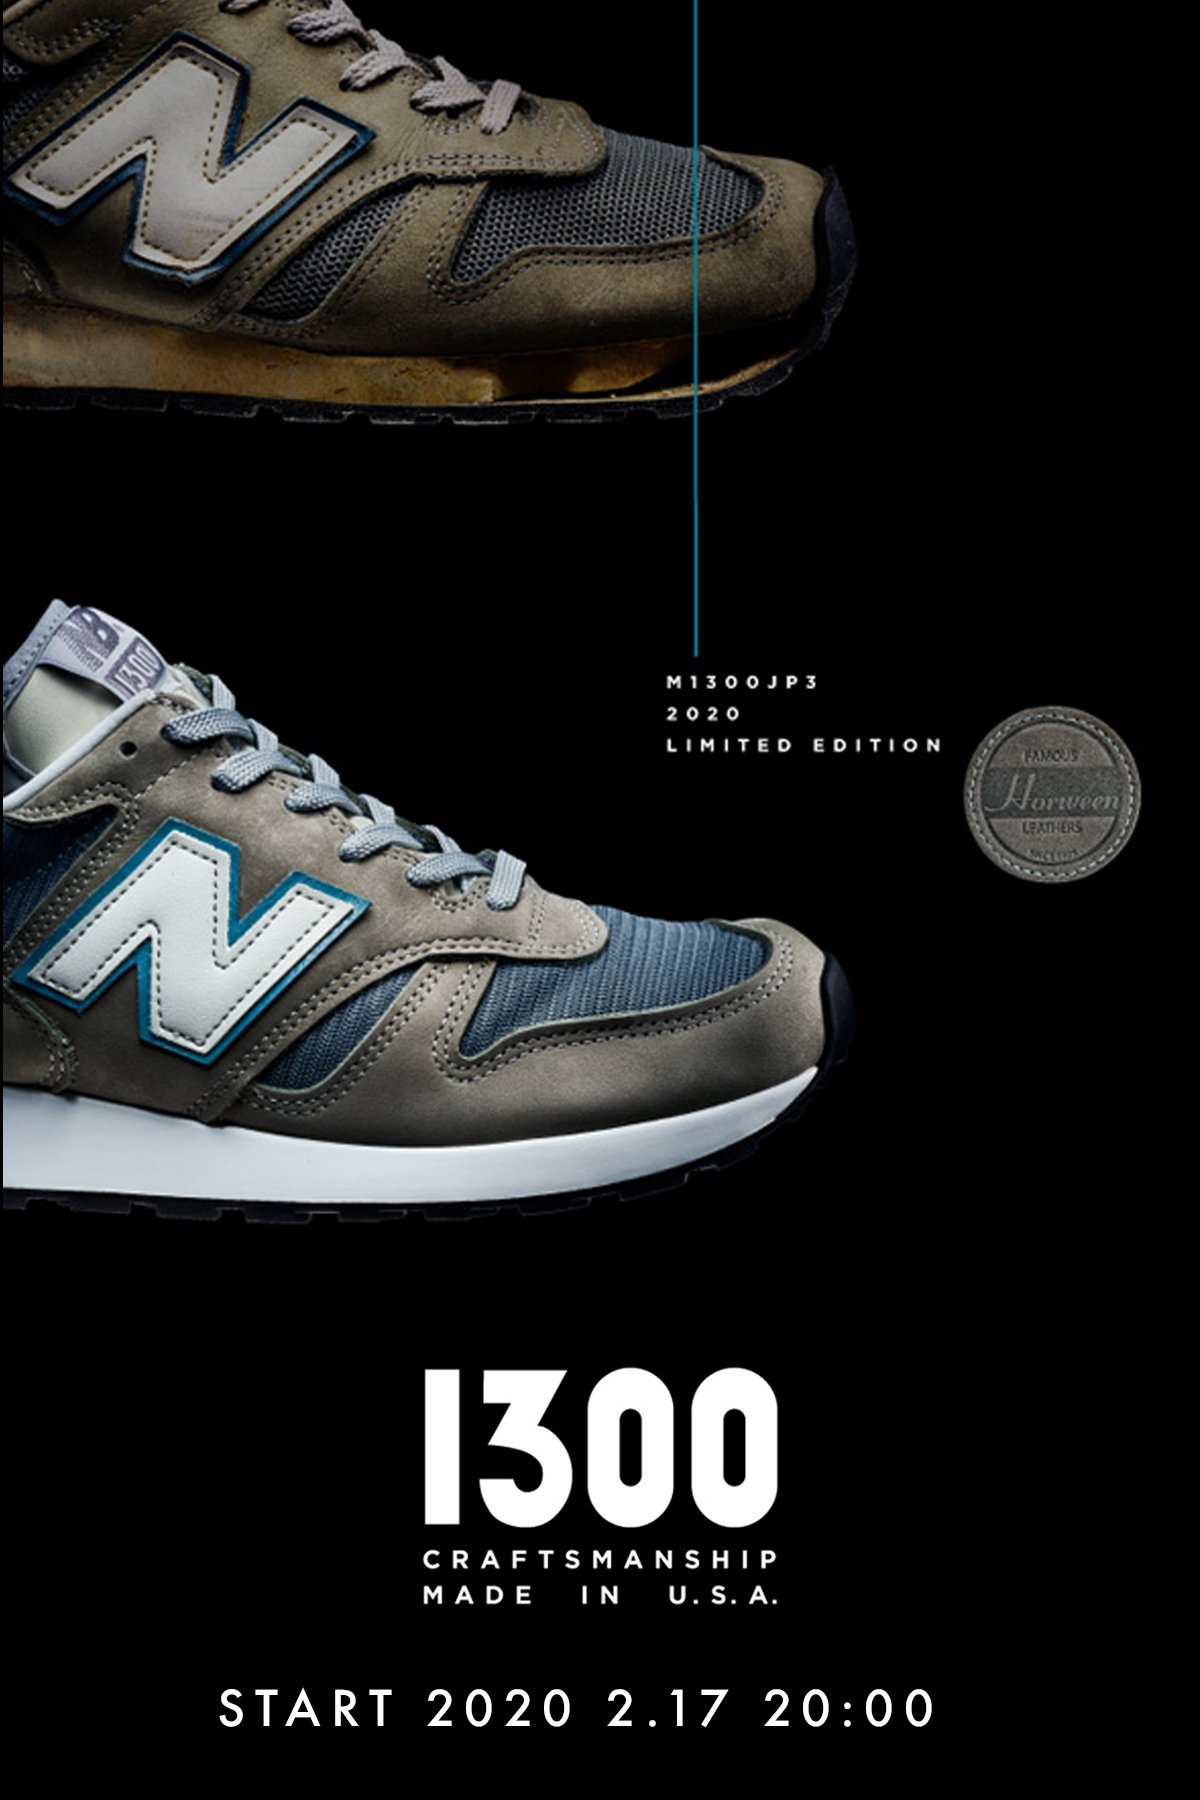 New Balance M1300 JP3 made in the USA